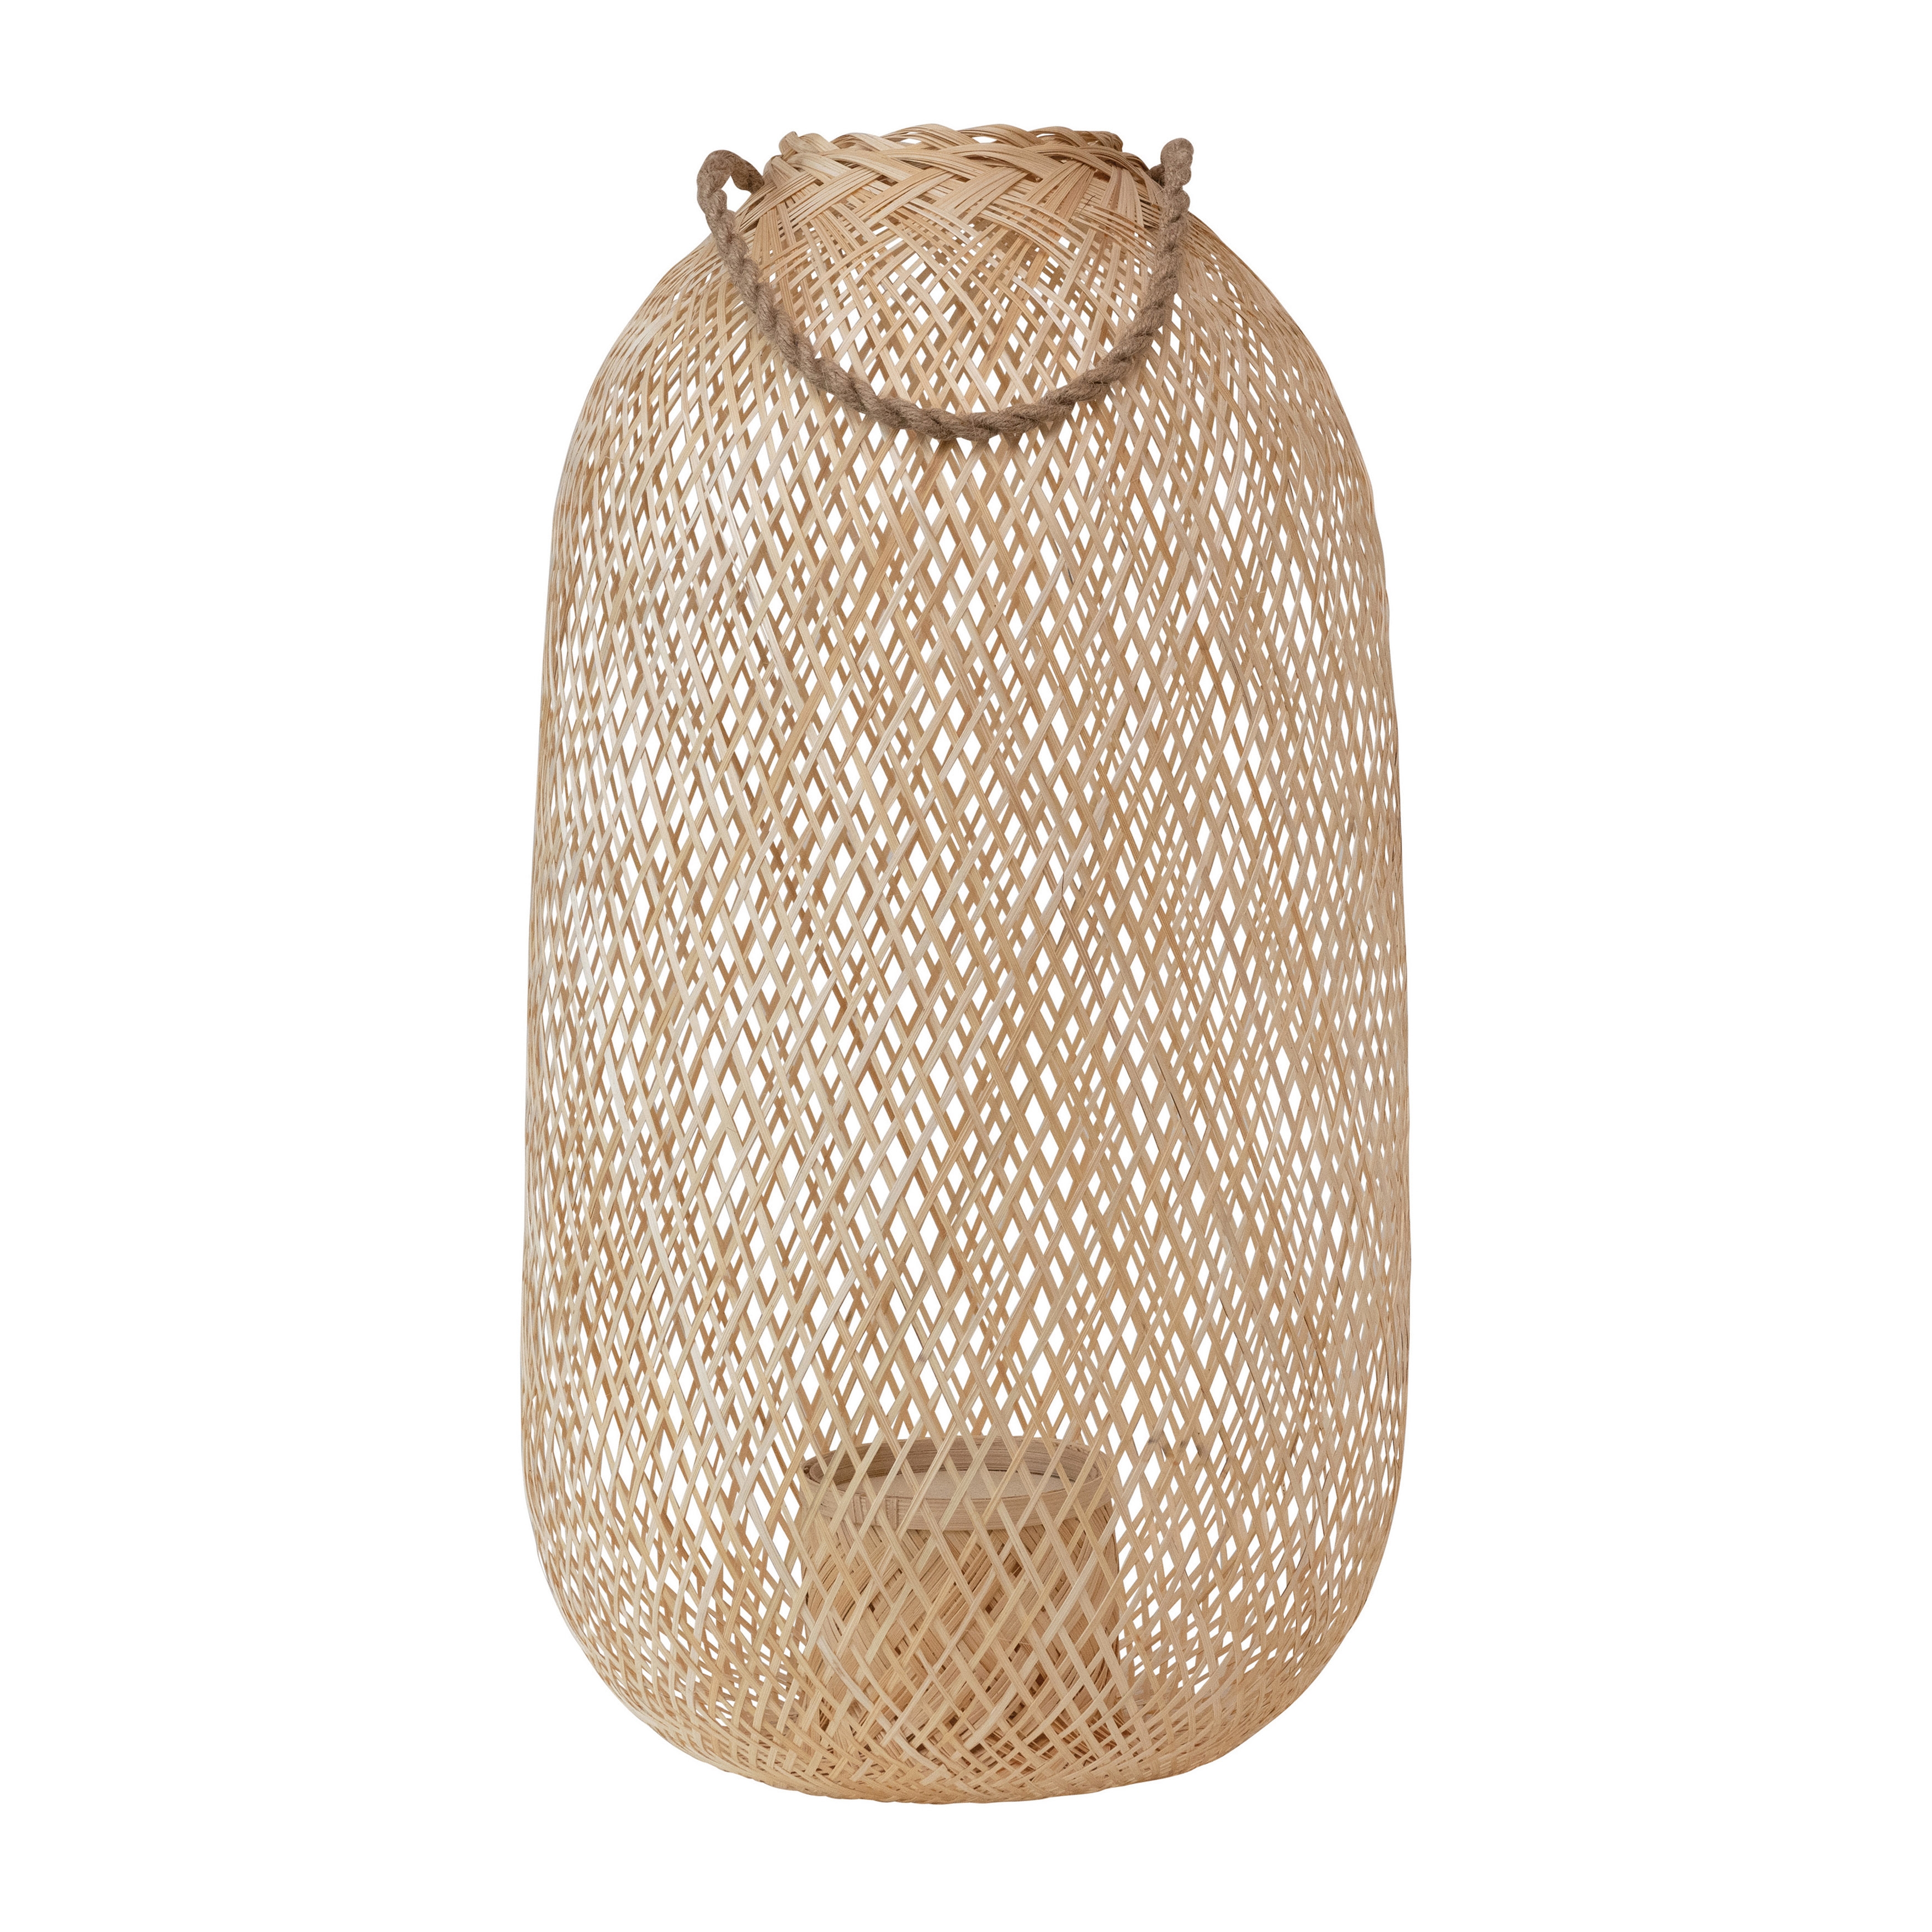 Hand-Woven Bamboo Lantern with Jute Handle & Glass Insert, Natural - Image 0